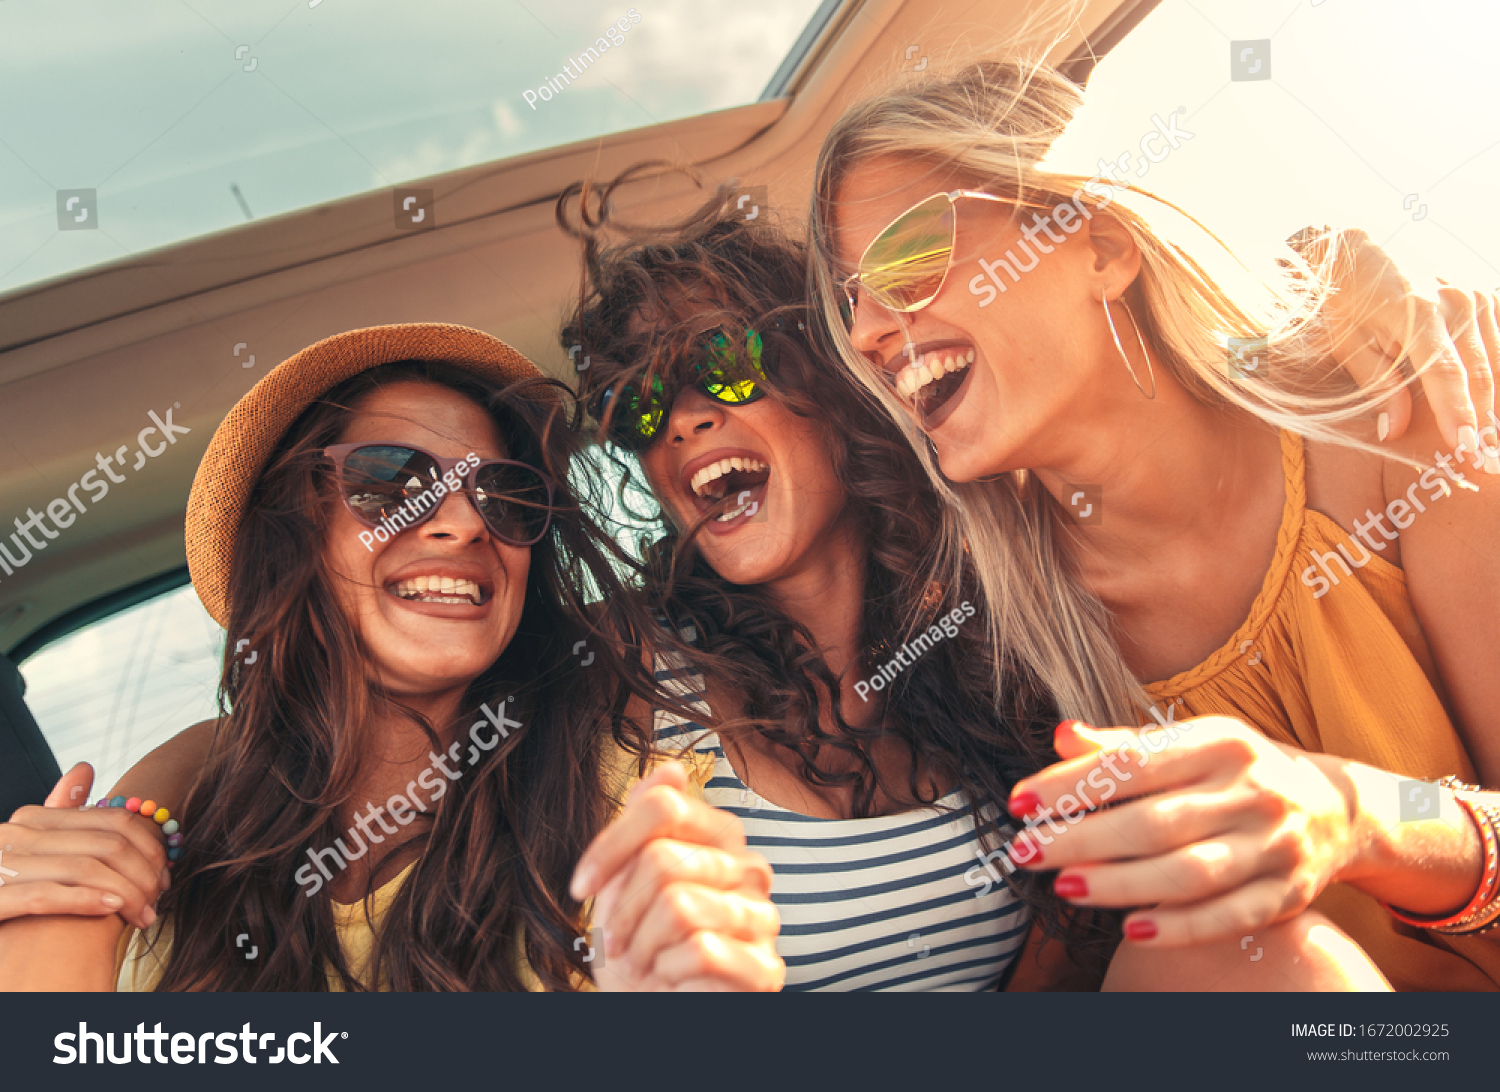 Group-of-friends Images, Stock Photos & Vectors | Shutterstock